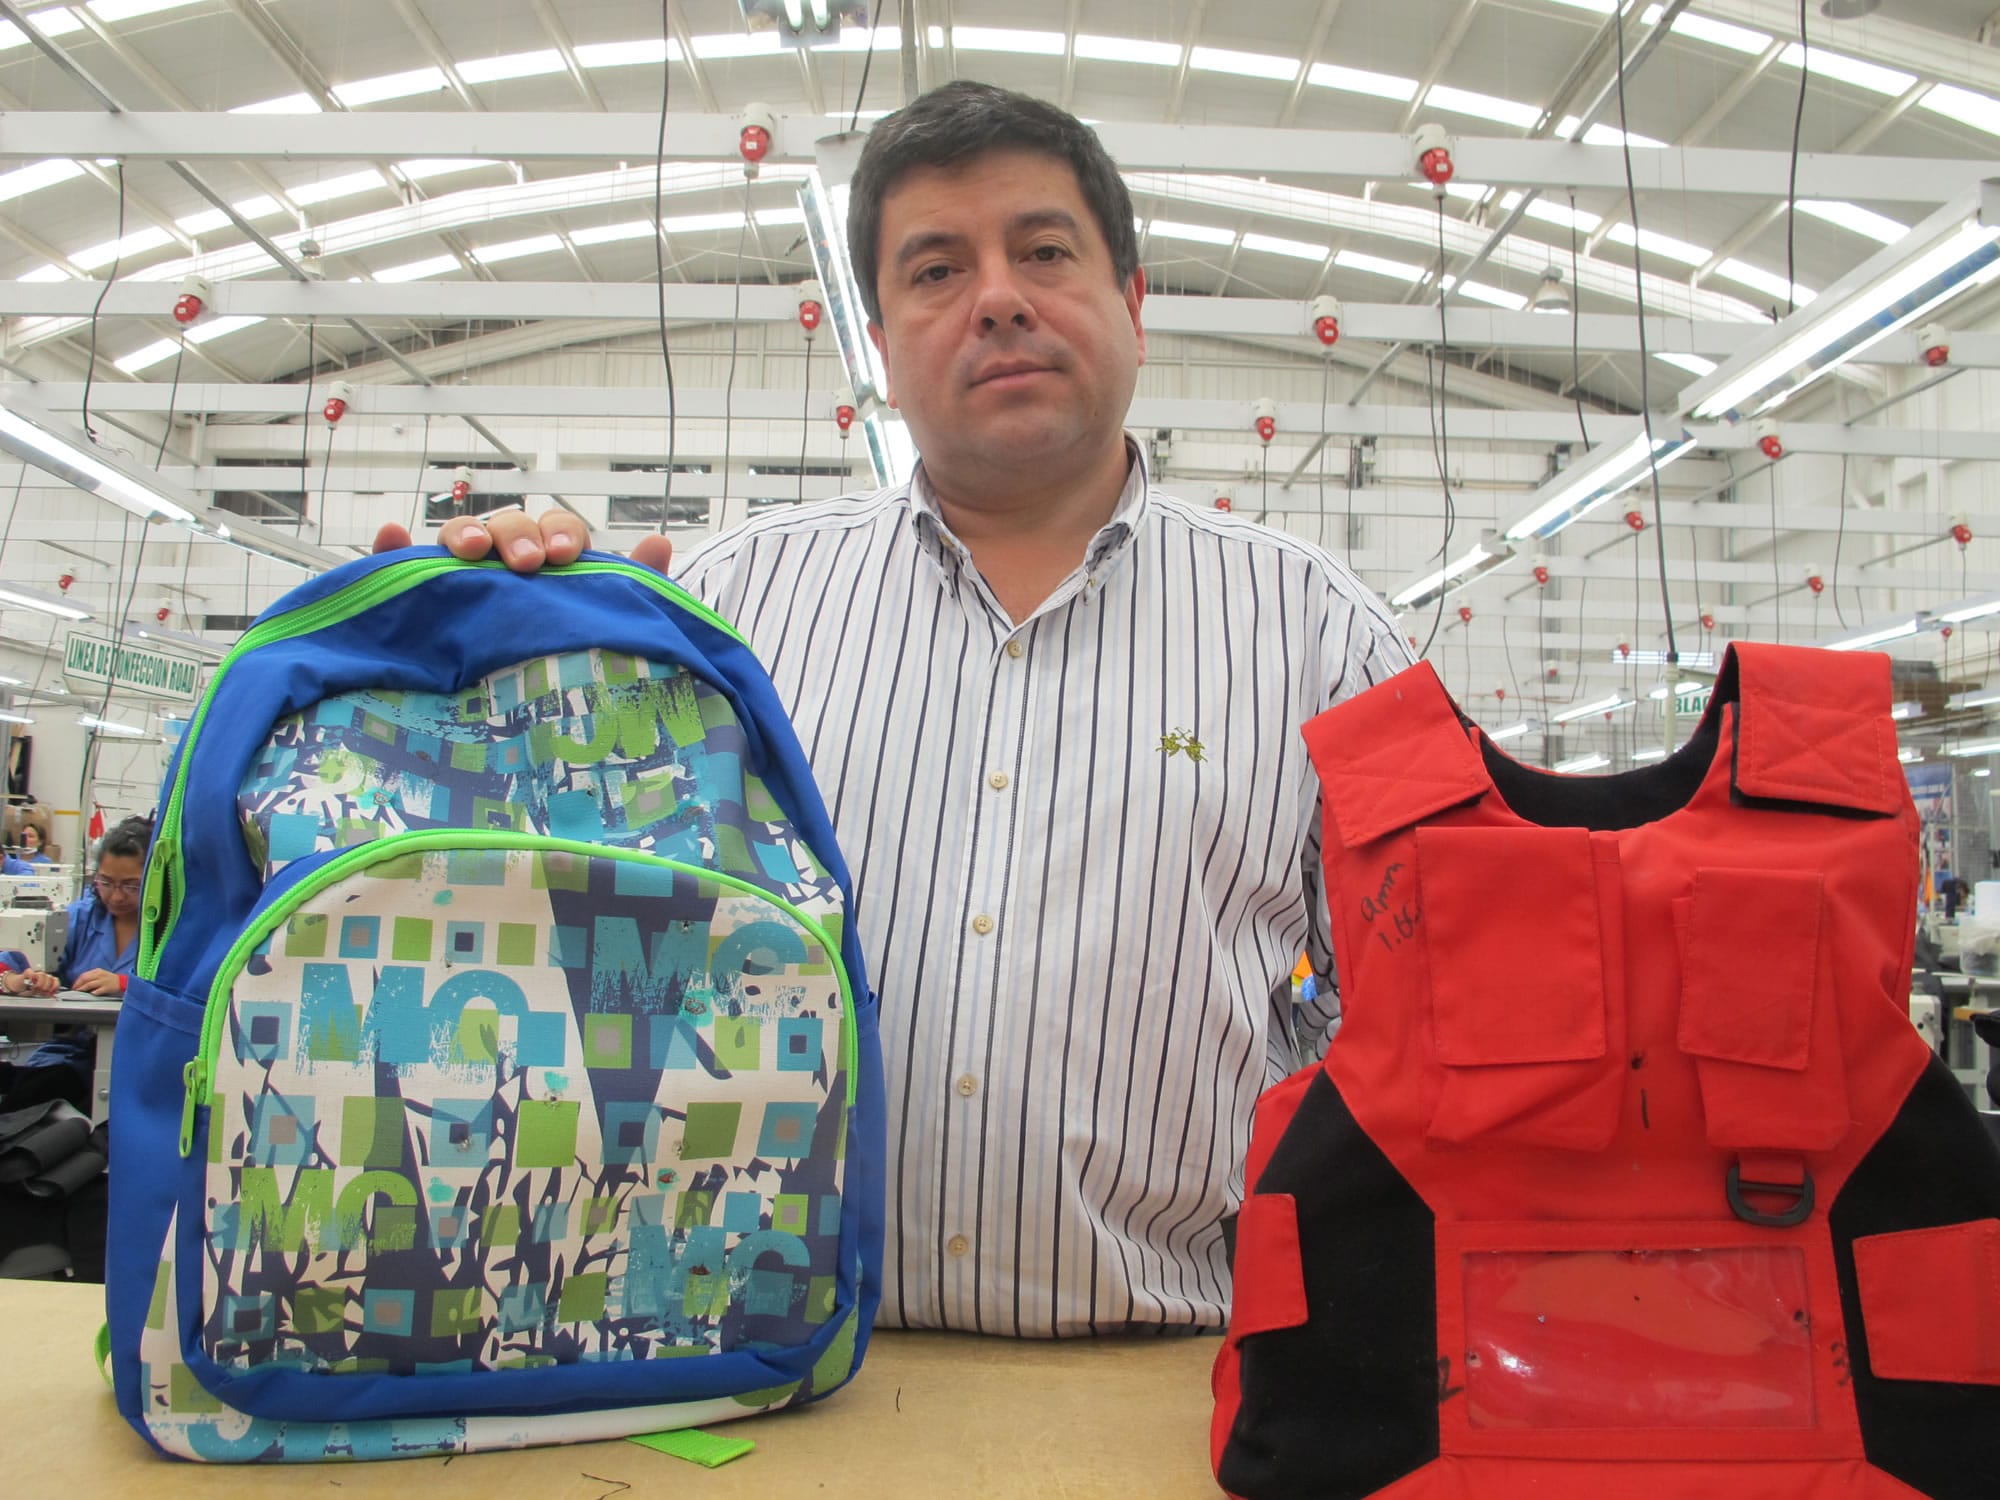 Clothing maker Miguel Caballero, know as &quot;the Armani of bulletproof clothing,&quot; holds two of his company's new products for American schoolchildren, a bulletproof backpack and vest.